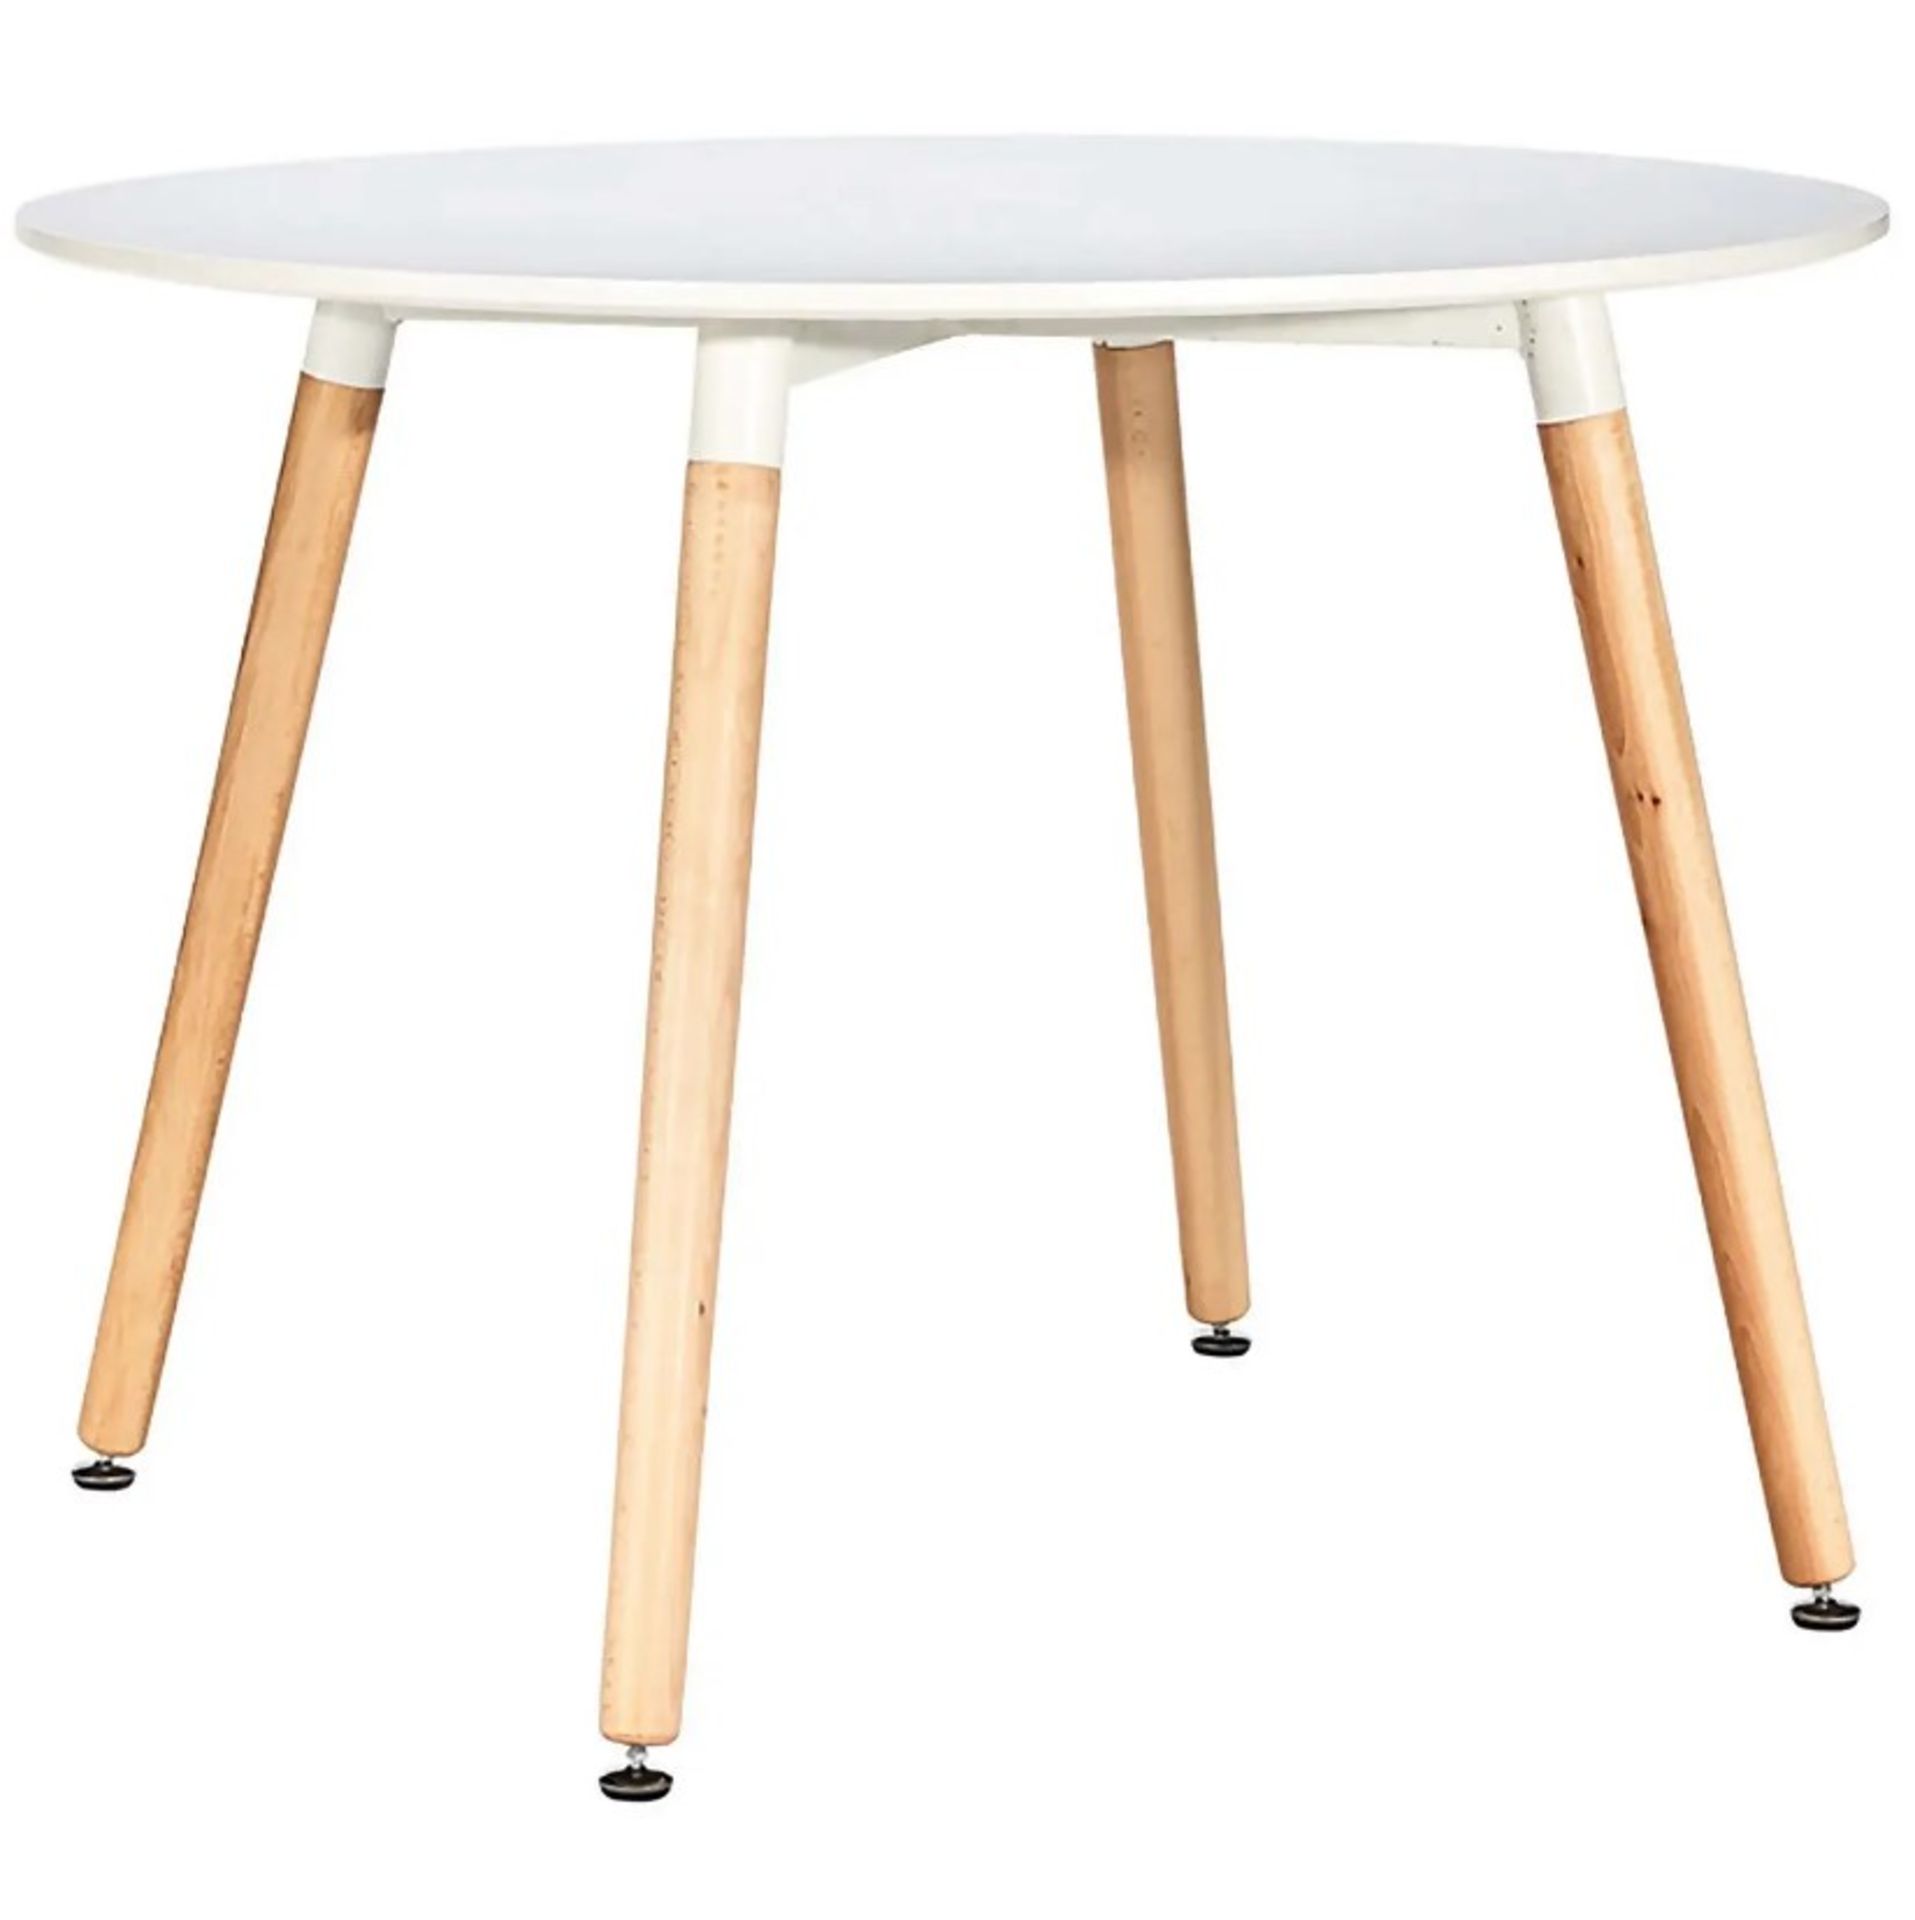 (60/5E) Chloe 4 Seater Round Table. White Painted Finish MDF Top, Solid Beech Legs. (H74x Dia 90c... - Image 3 of 4